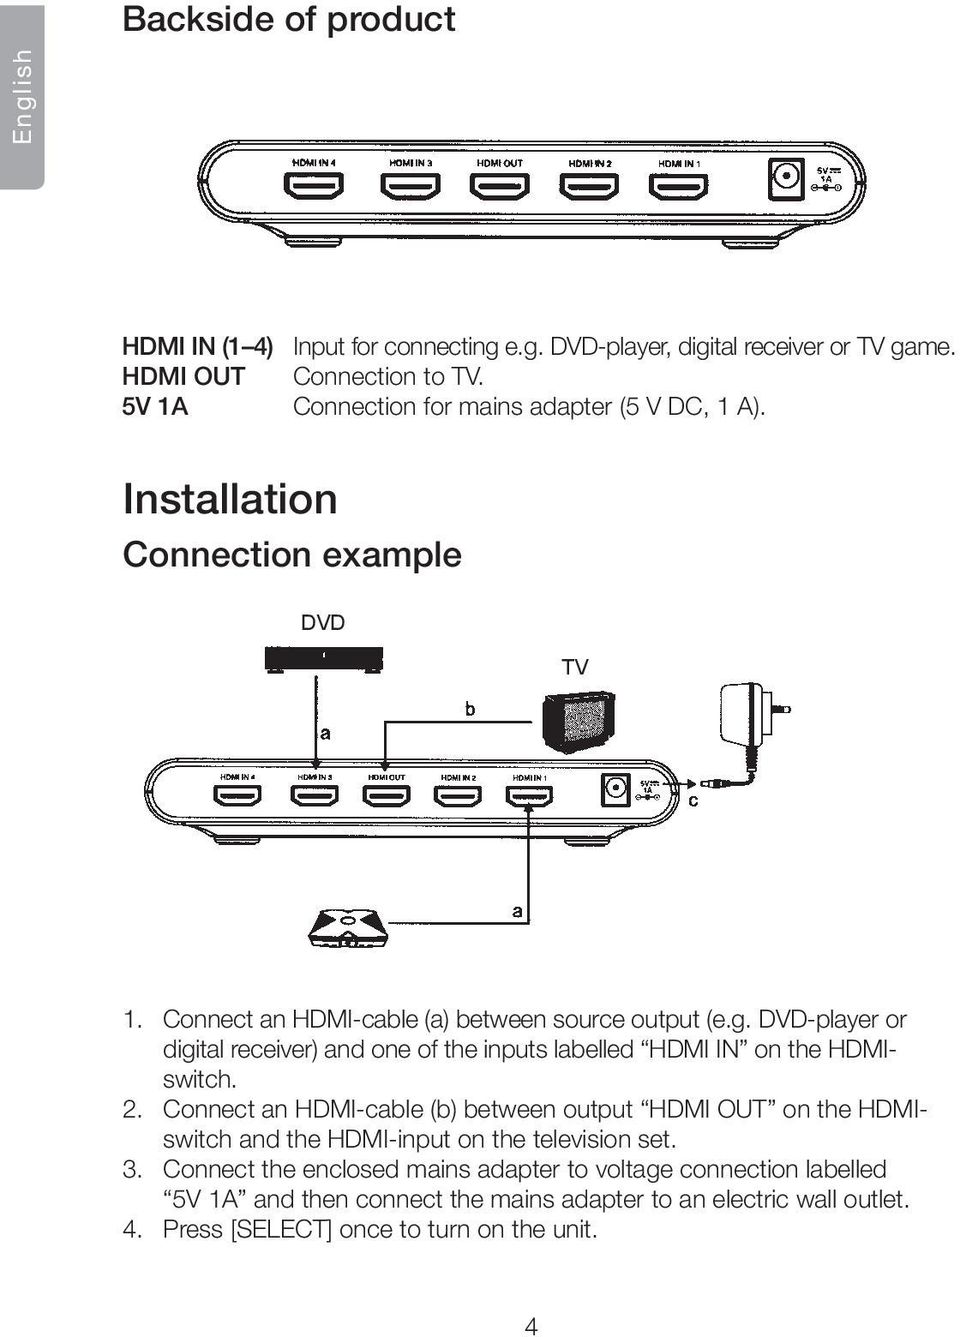 DVD-player or digital receiver) and one of the inputs labelled HDMI IN on the HDMIswitch. 2.